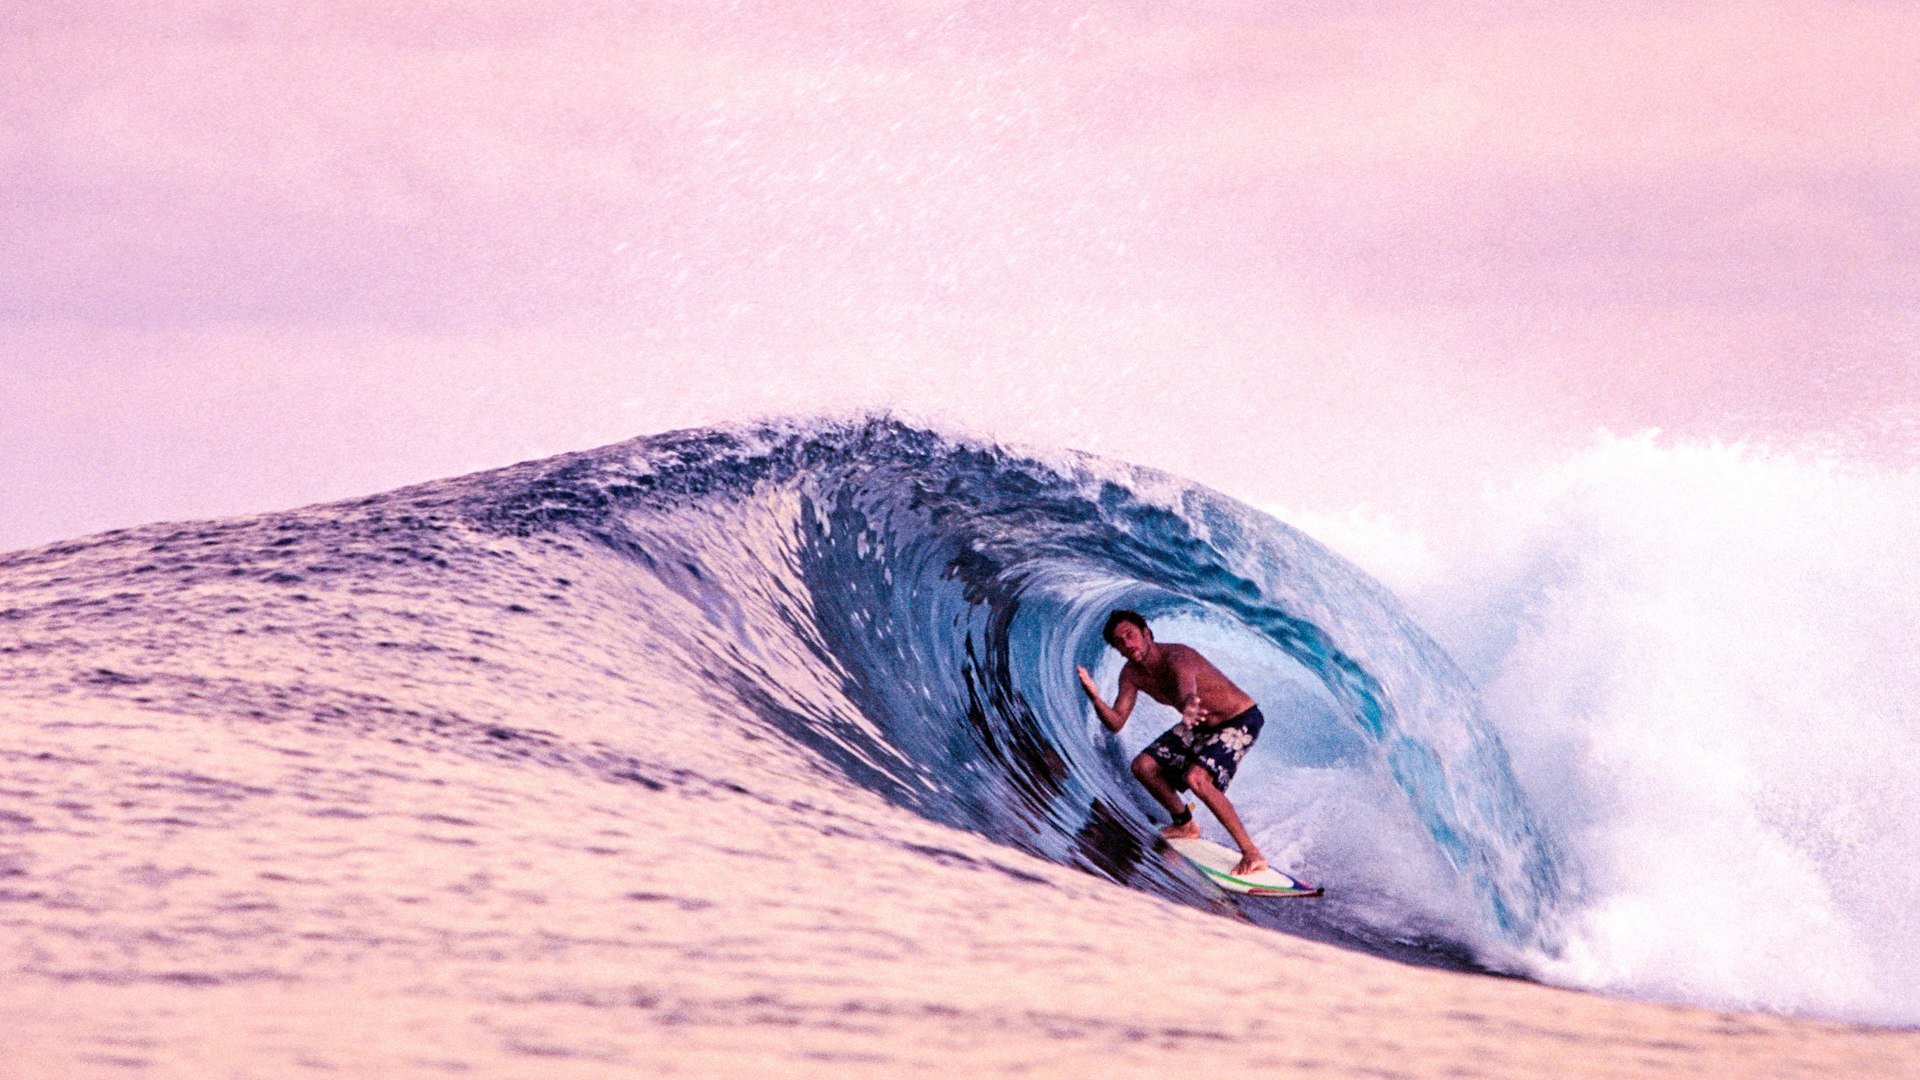 A surfer in a barrel in the Indian Ocean